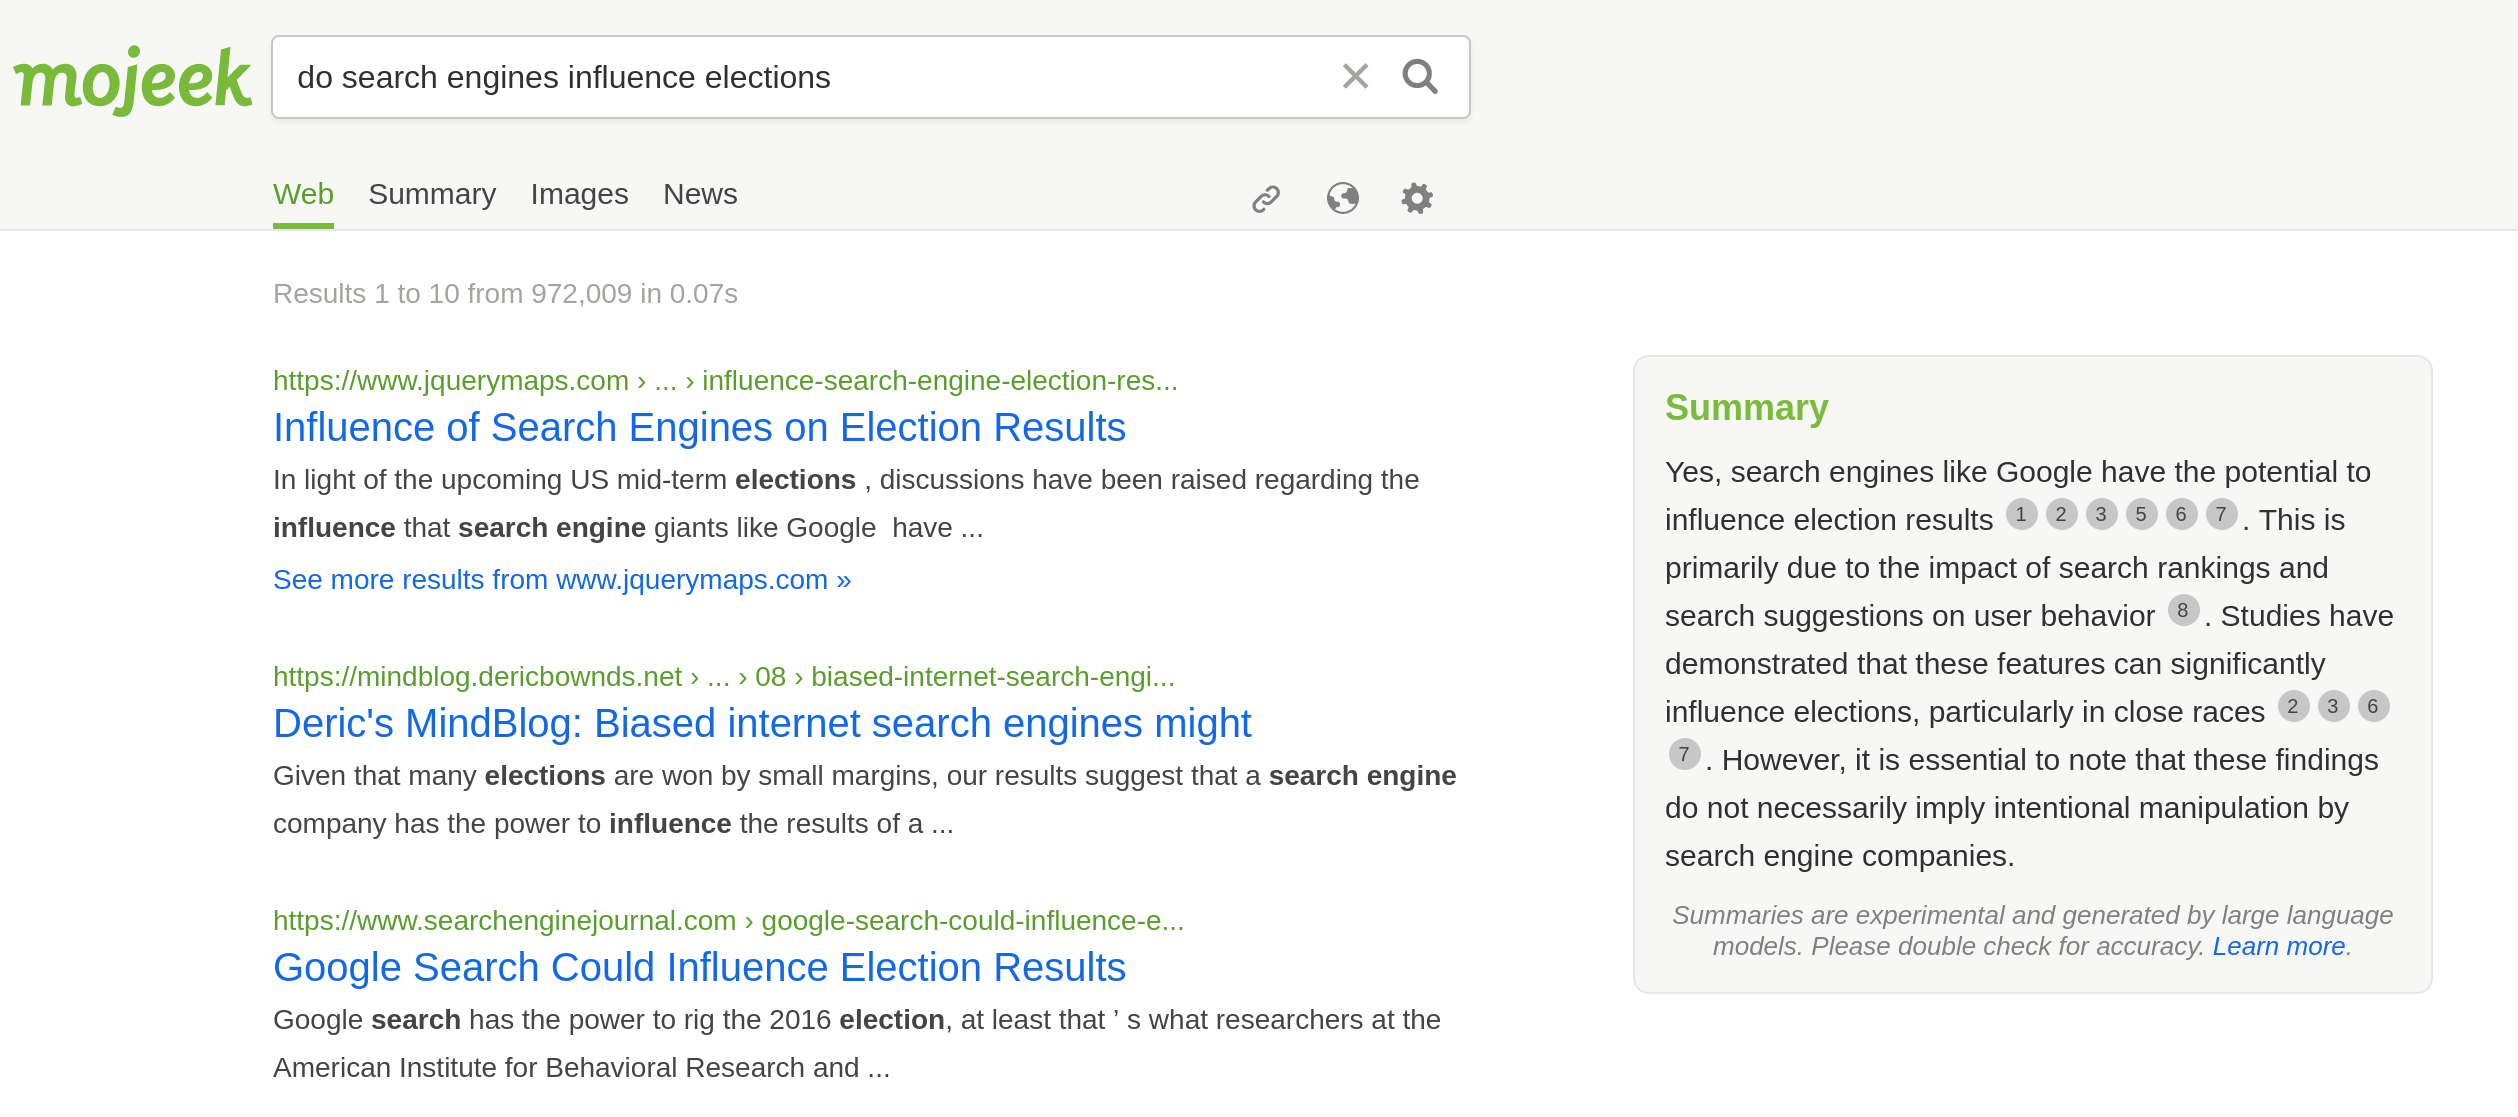 Mojeek Summary being asked if search engines influence elections, replying: Yes, search engines like Google have the potential to influence election results . This is primarily due to the impact of search rankings and search suggestions on user behavior . Studies have demonstrated that these features can significantly influence elections, particularly in close races . However, it is essential to note that these findings do not necessarily imply intentional manipulation by search engine companies.